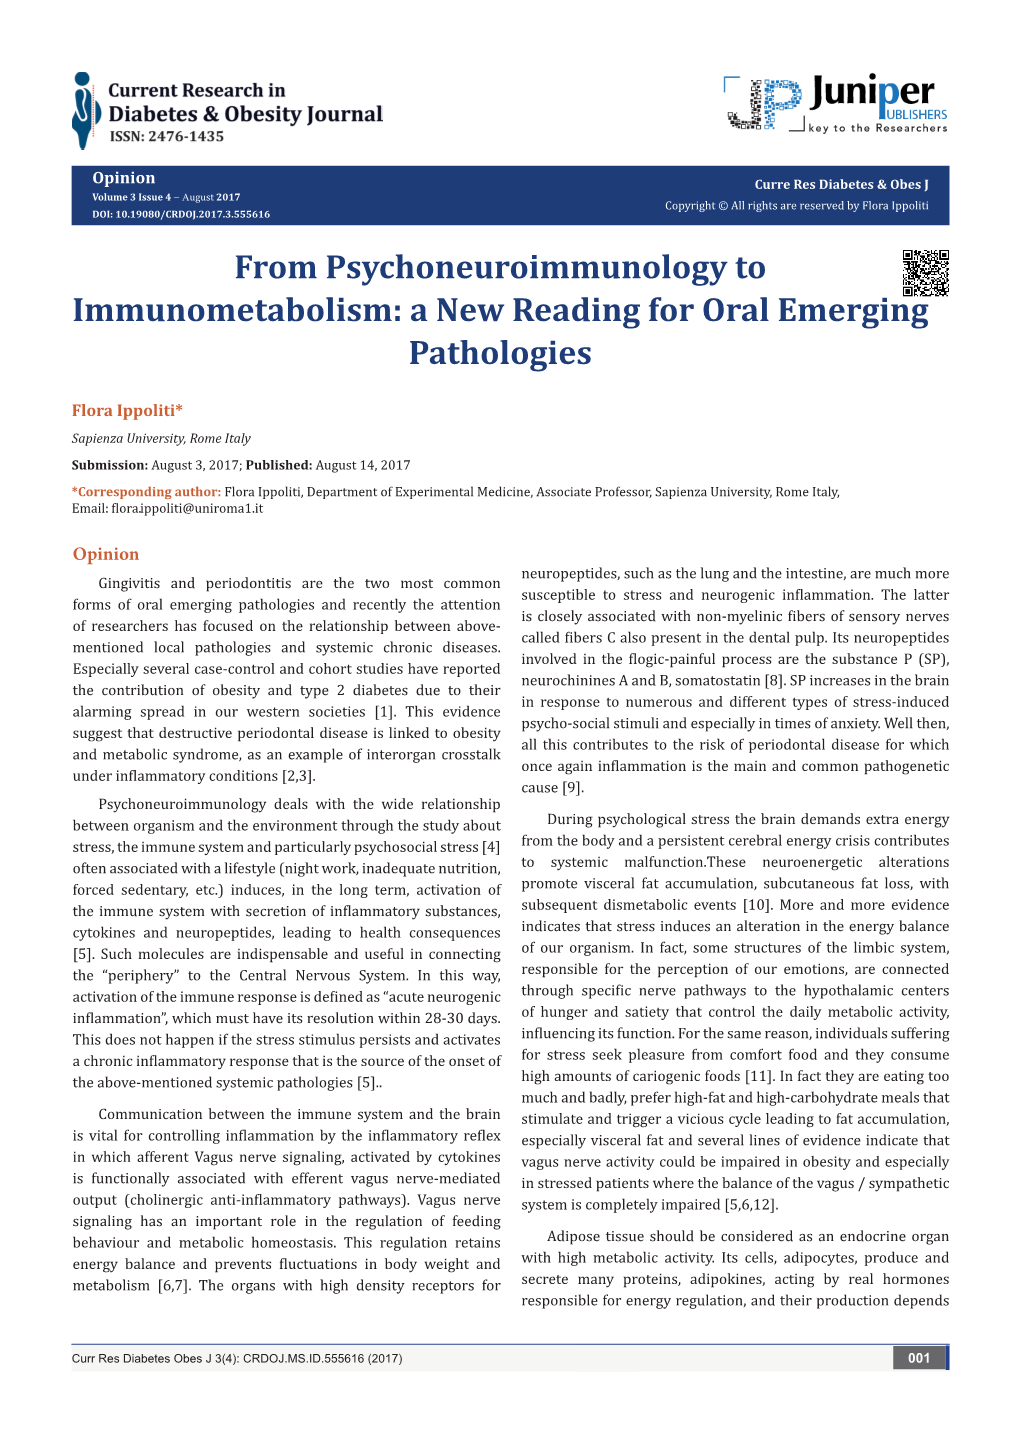 From Psychoneuroimmunology to Immunometabolism: a New Reading for Oral Emerging Pathologies